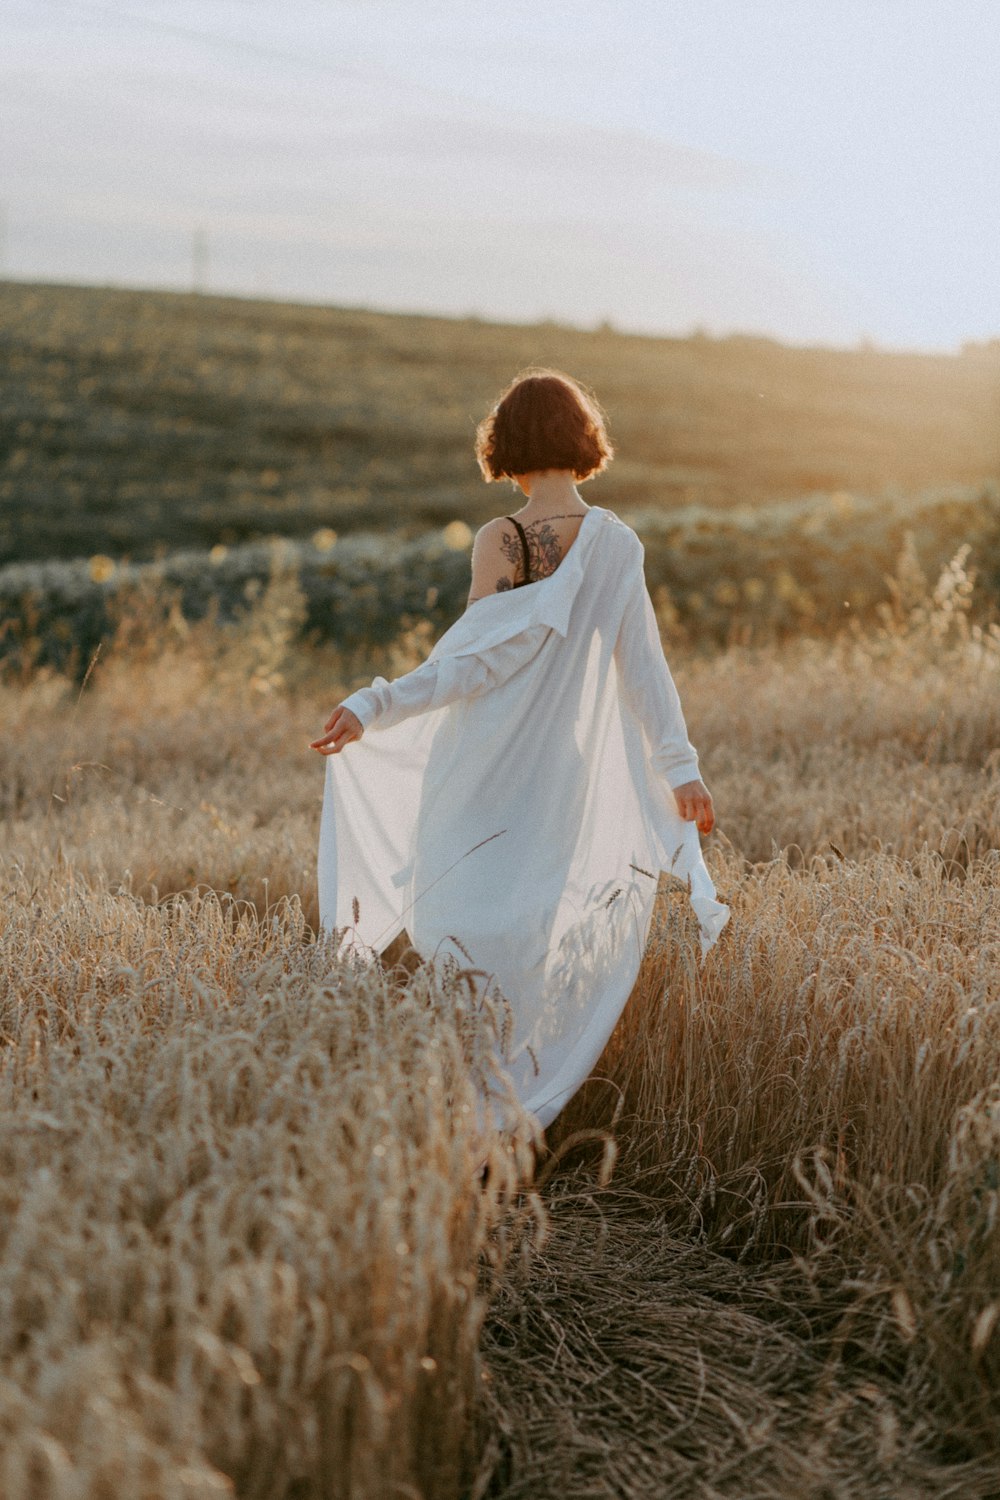 woman in white dress walking on brown grass field during daytime